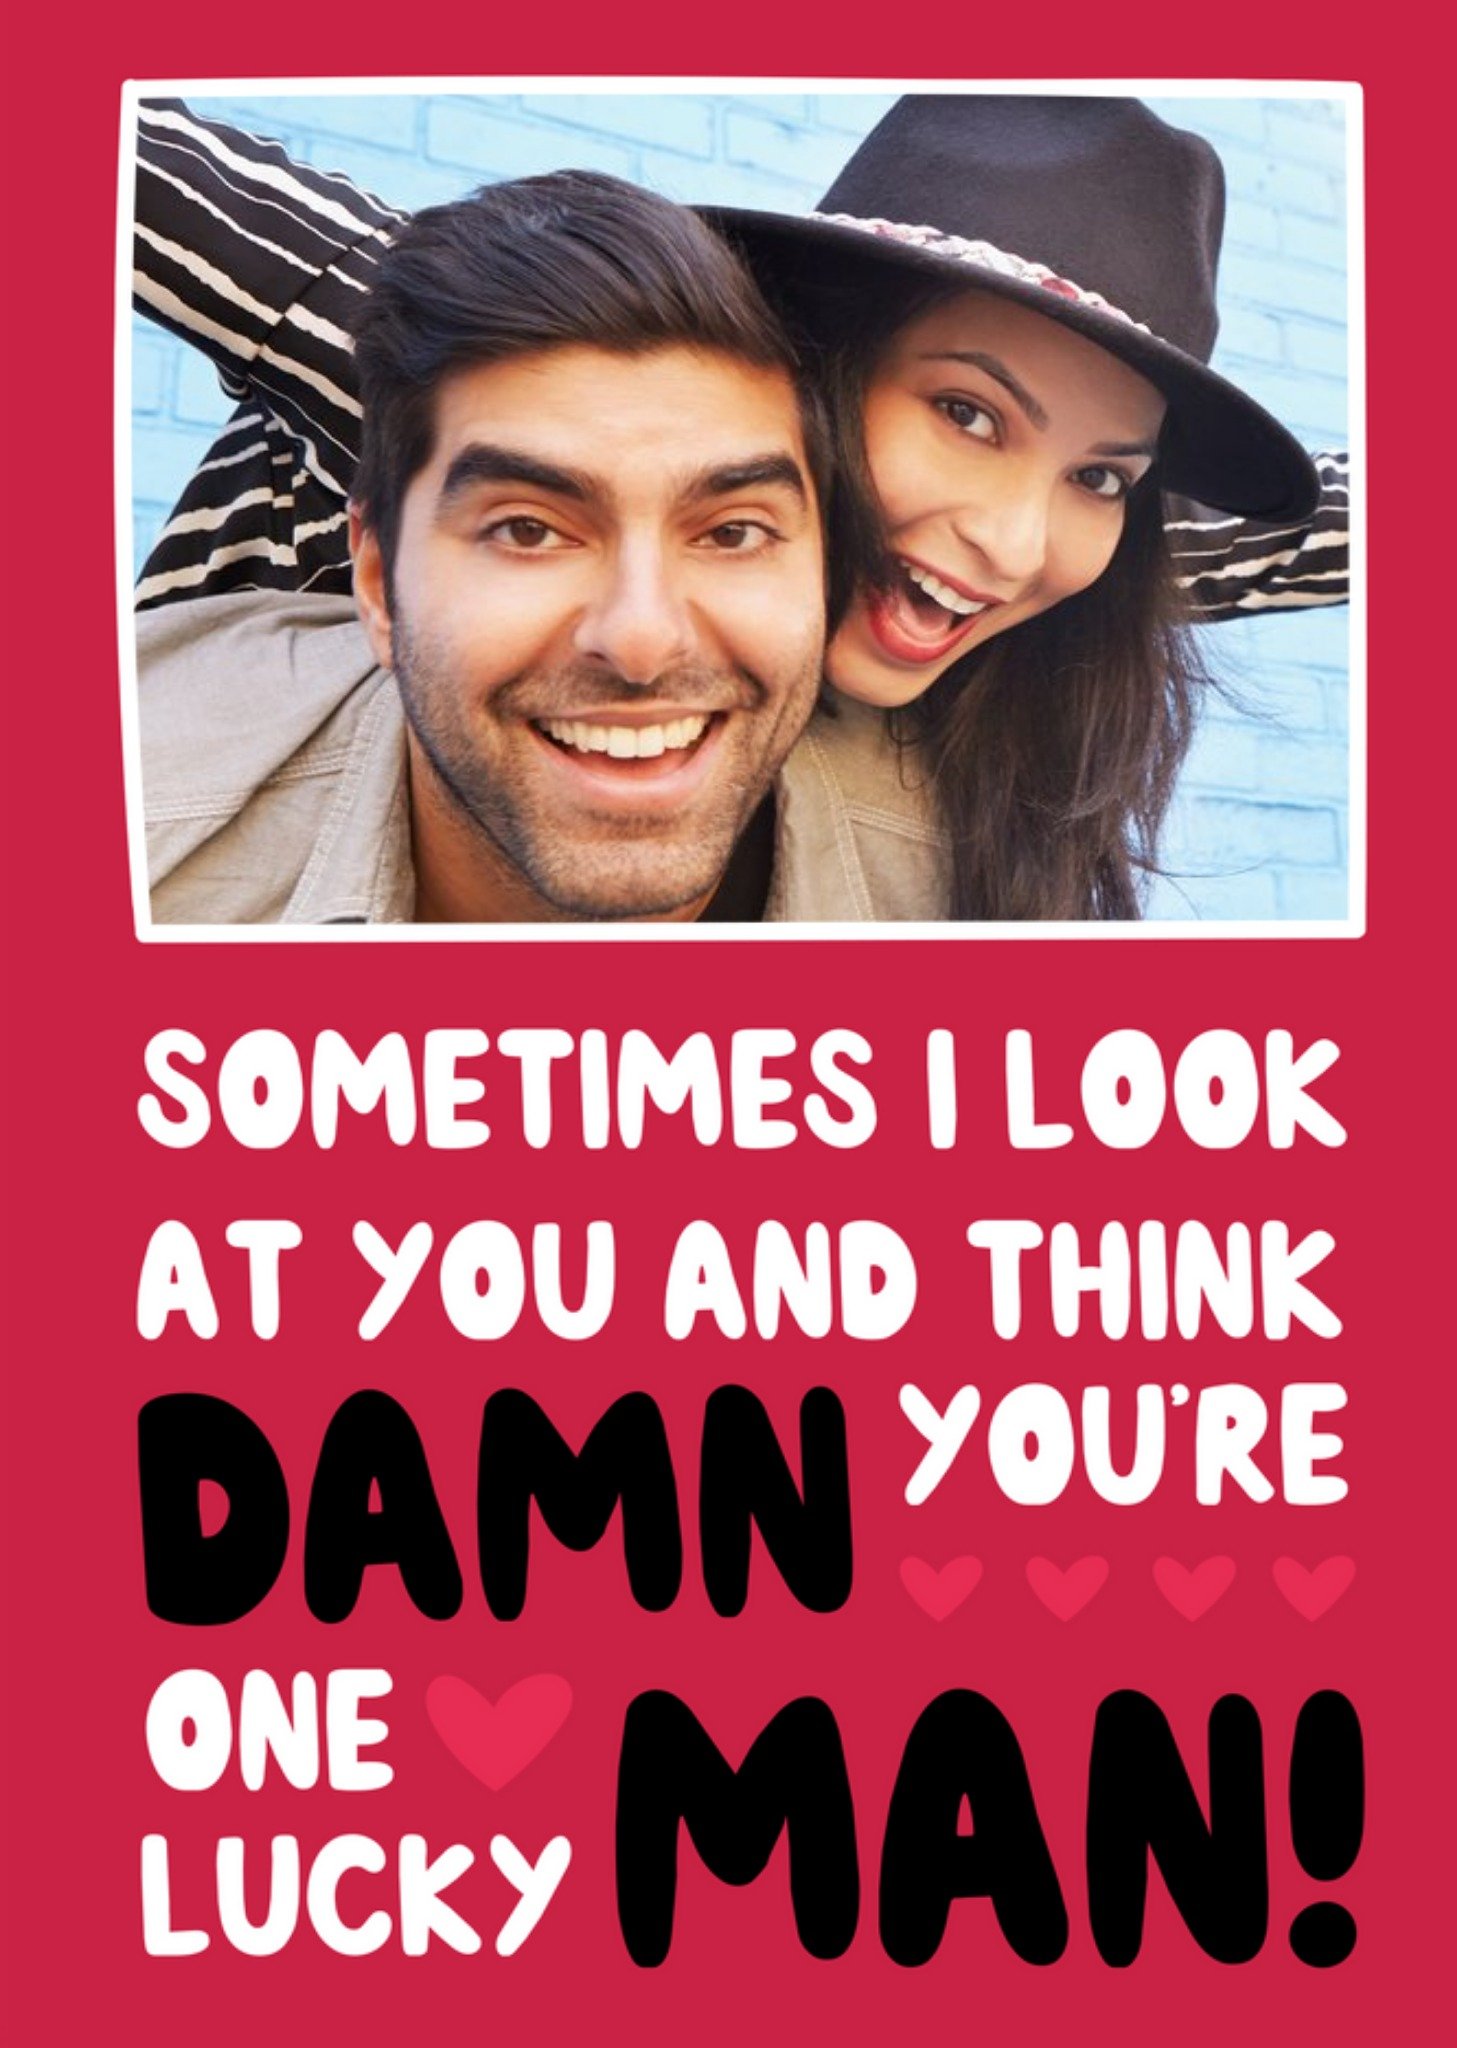 Moonpig Damn You're One Lucky Man Photo Upload Valentine's Card, Large